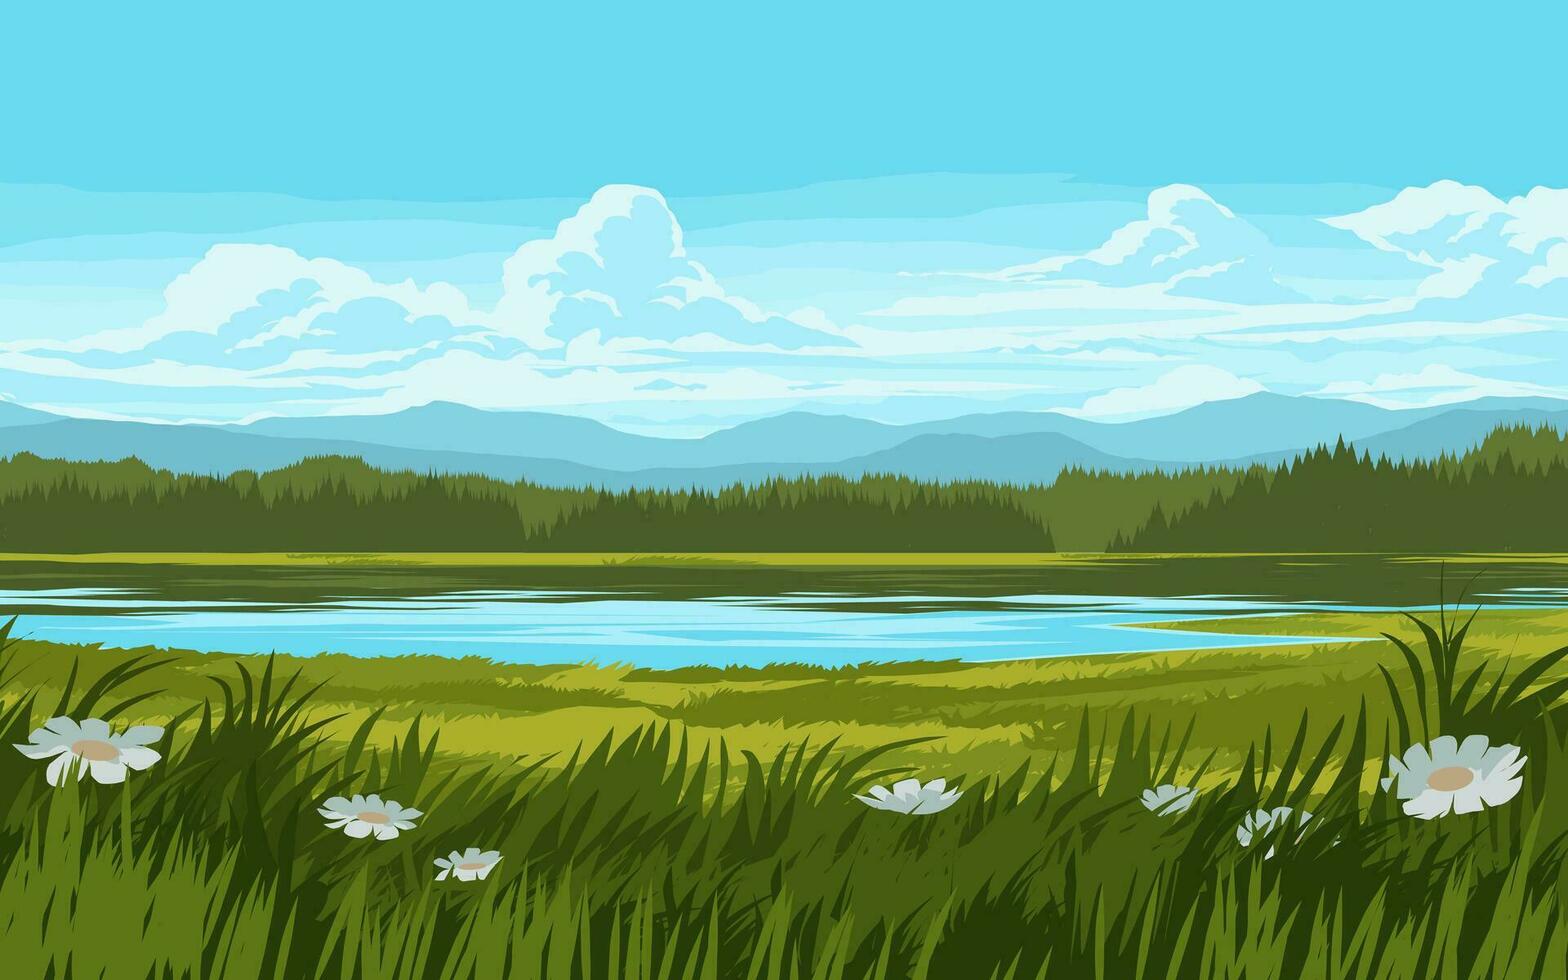 Nature landscape with lake, meadow, and mountains vector